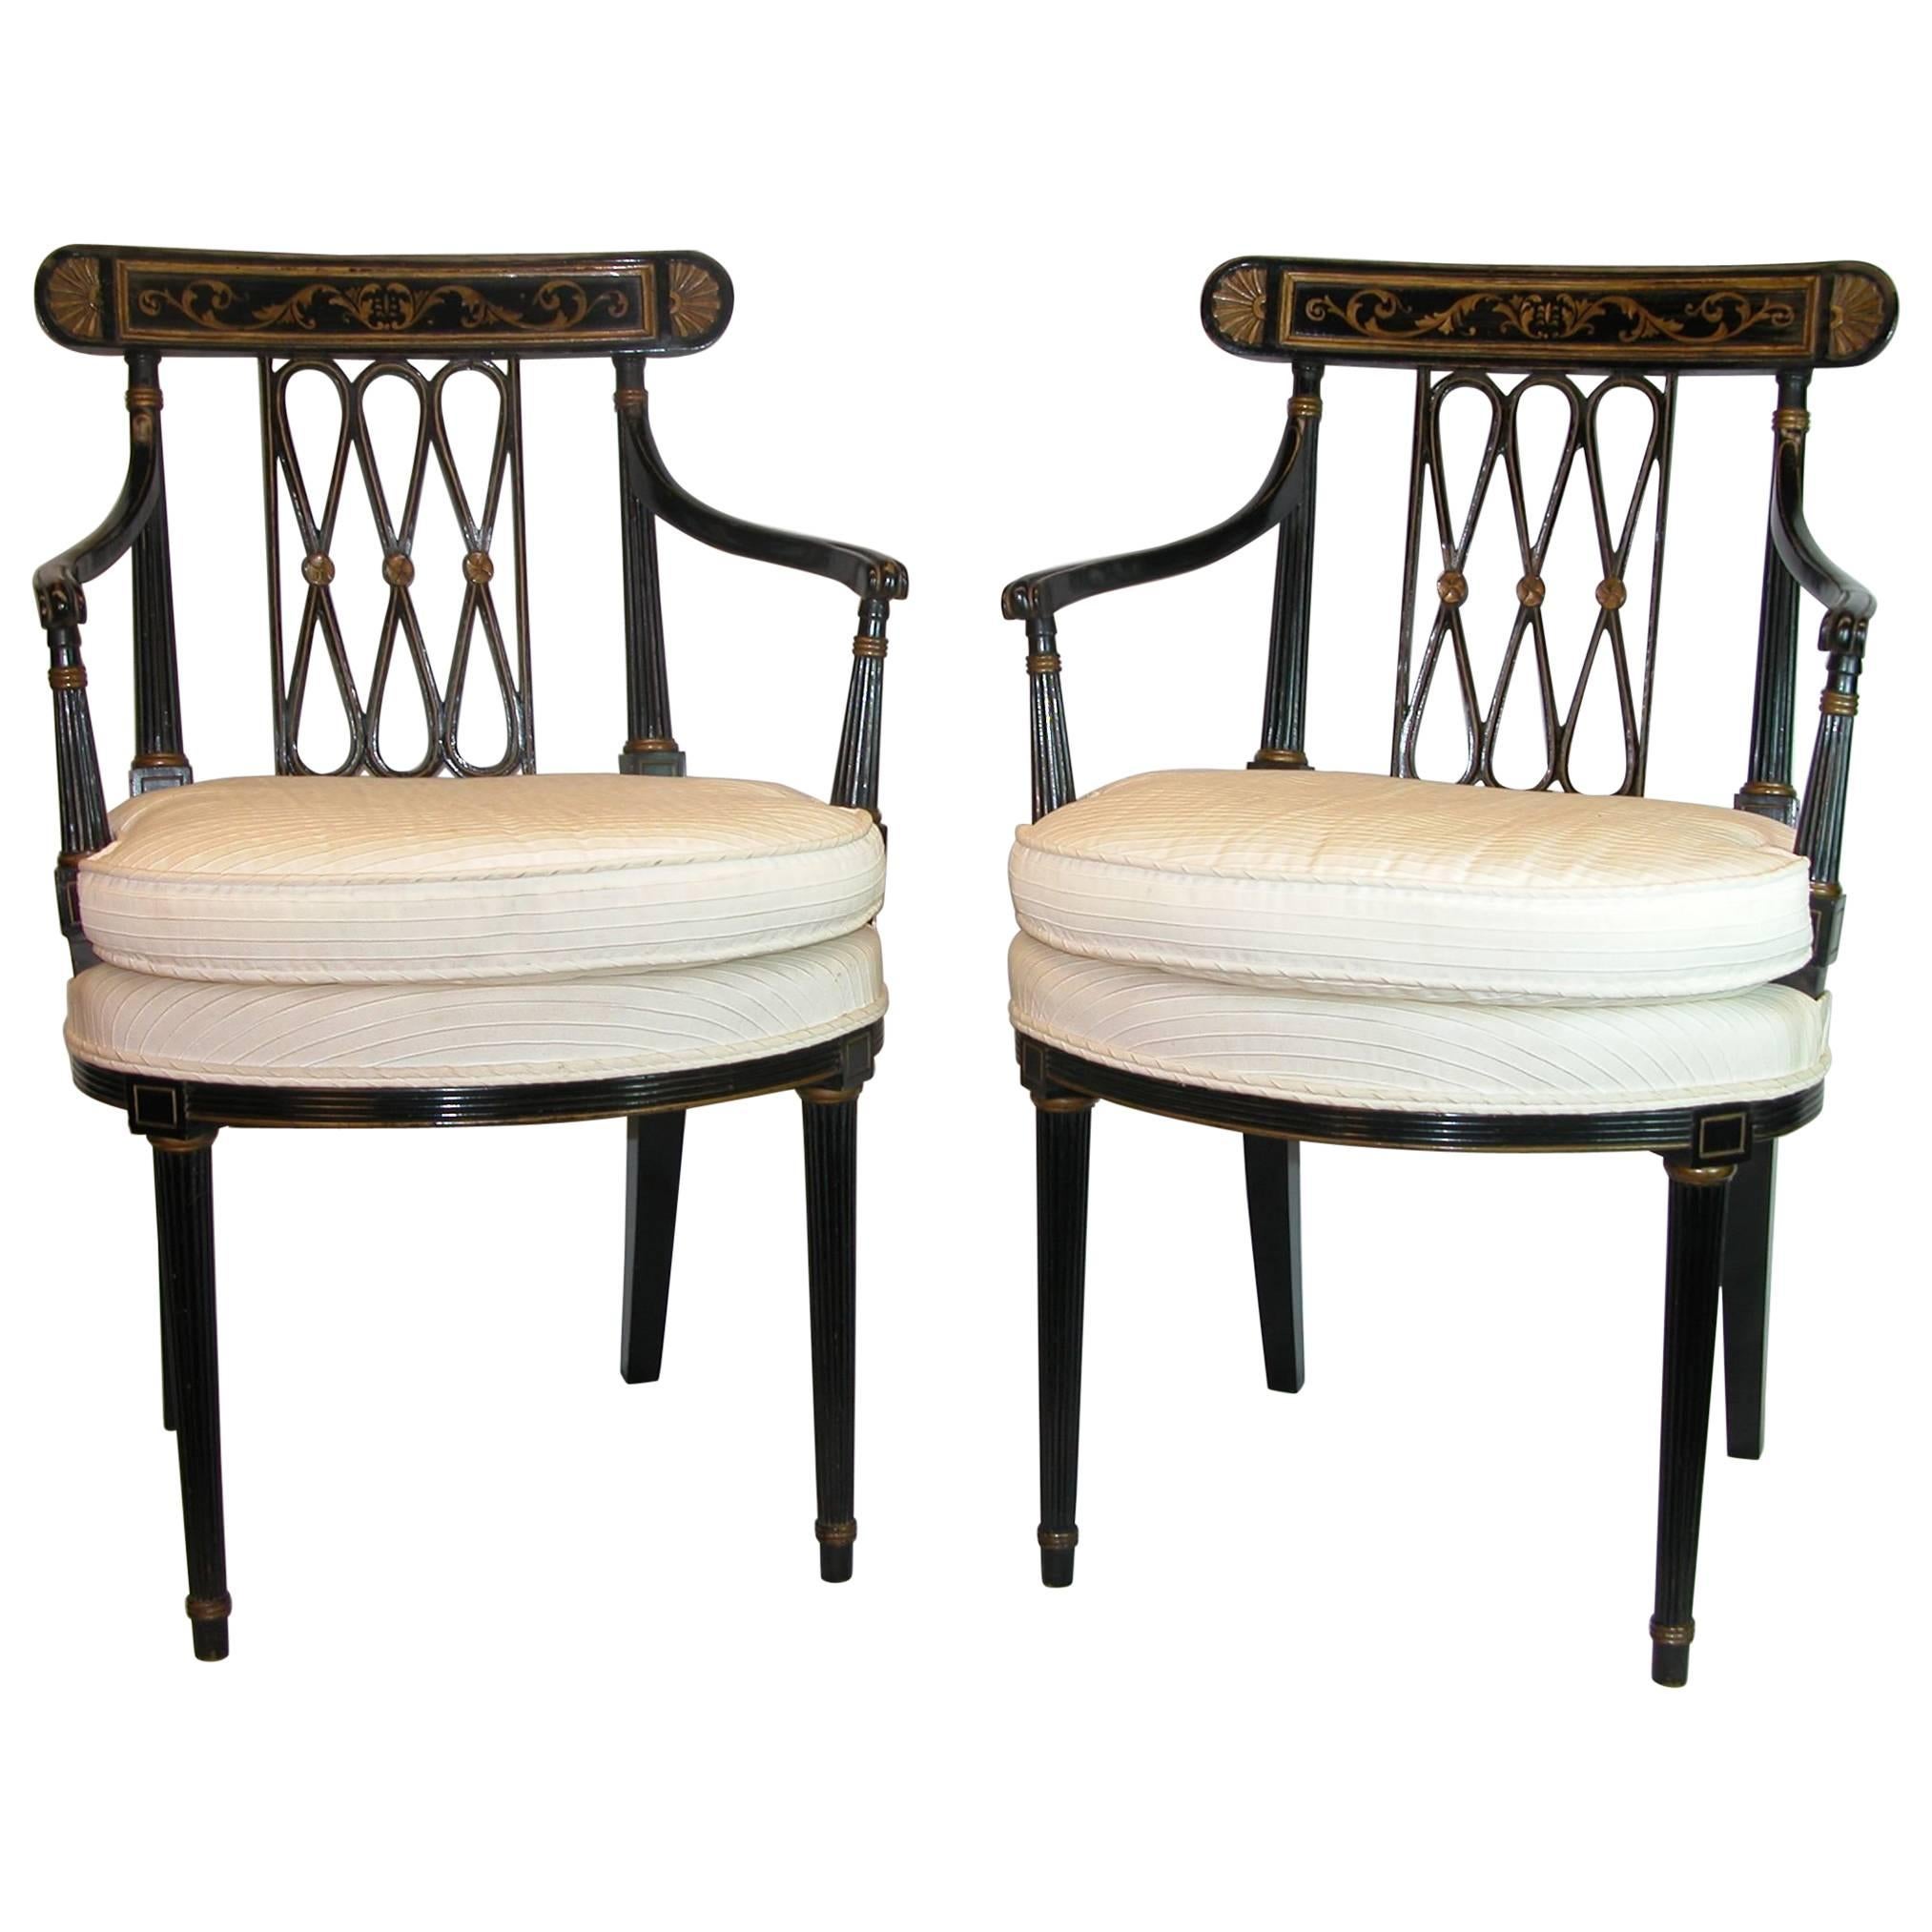 Pair Black Lacquered & Gold Decorated Diamond Back Regency Open Armchairs C 1850 For Sale